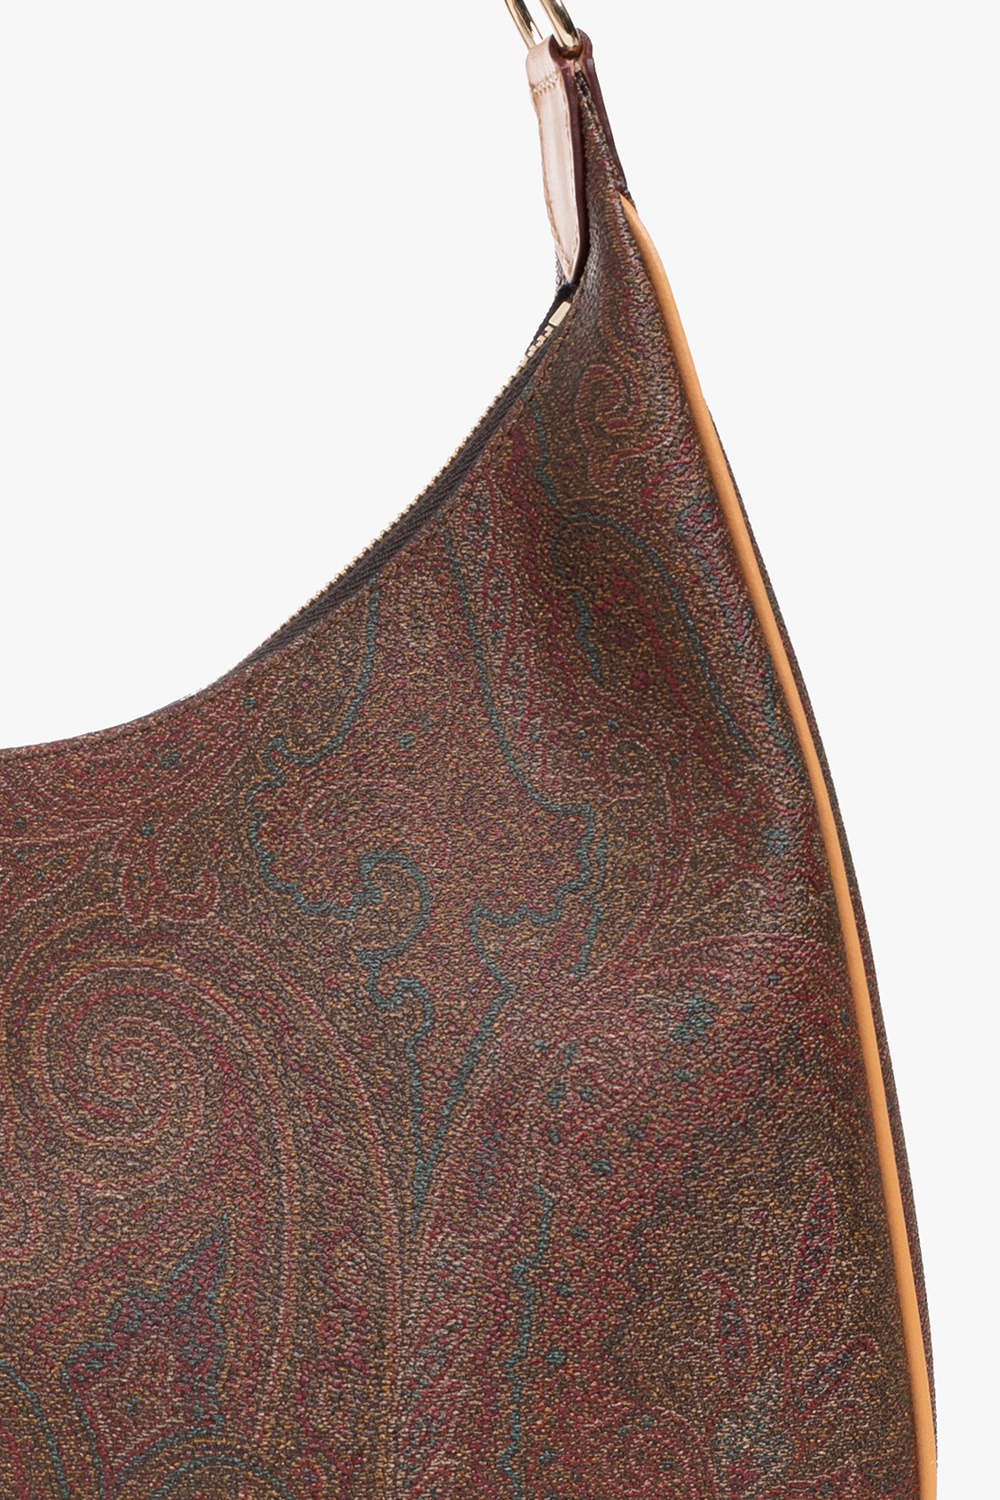 Reserved Please Do Not Buy Authentic Etro Paisley Shoulder Bag -  UK